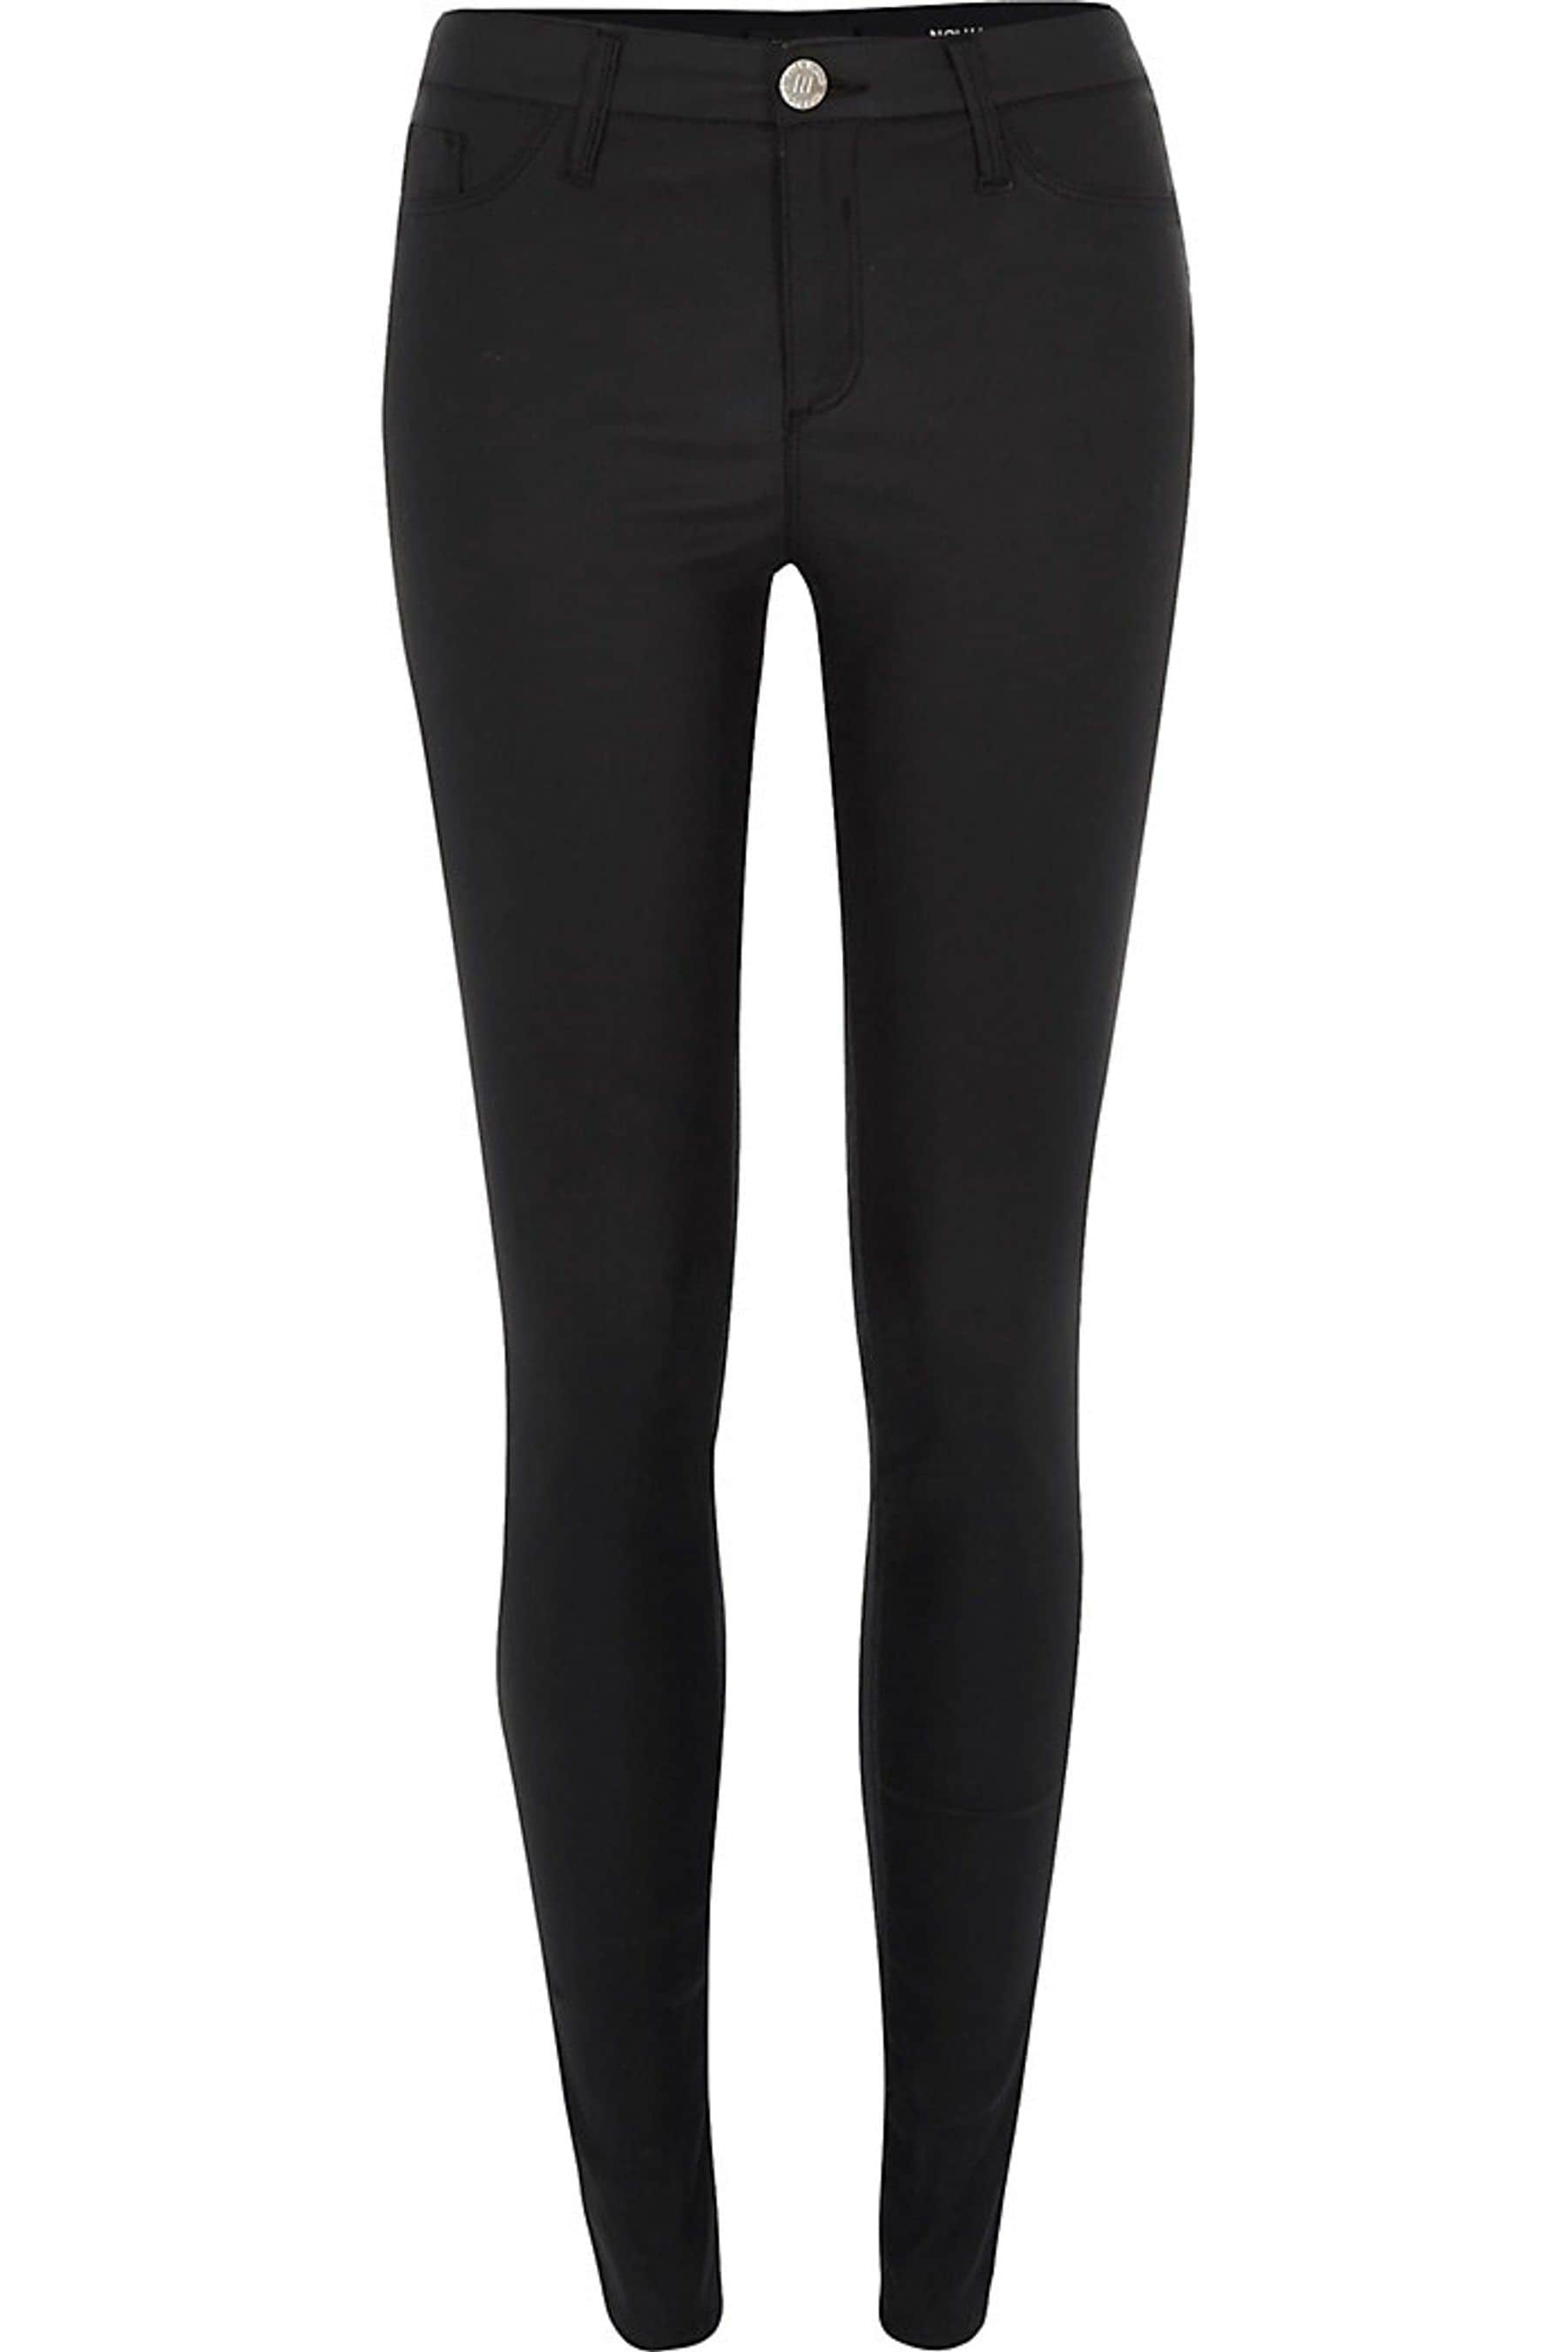 Buy River Island Black Coated Skinny Jeans from the Next UK online shop